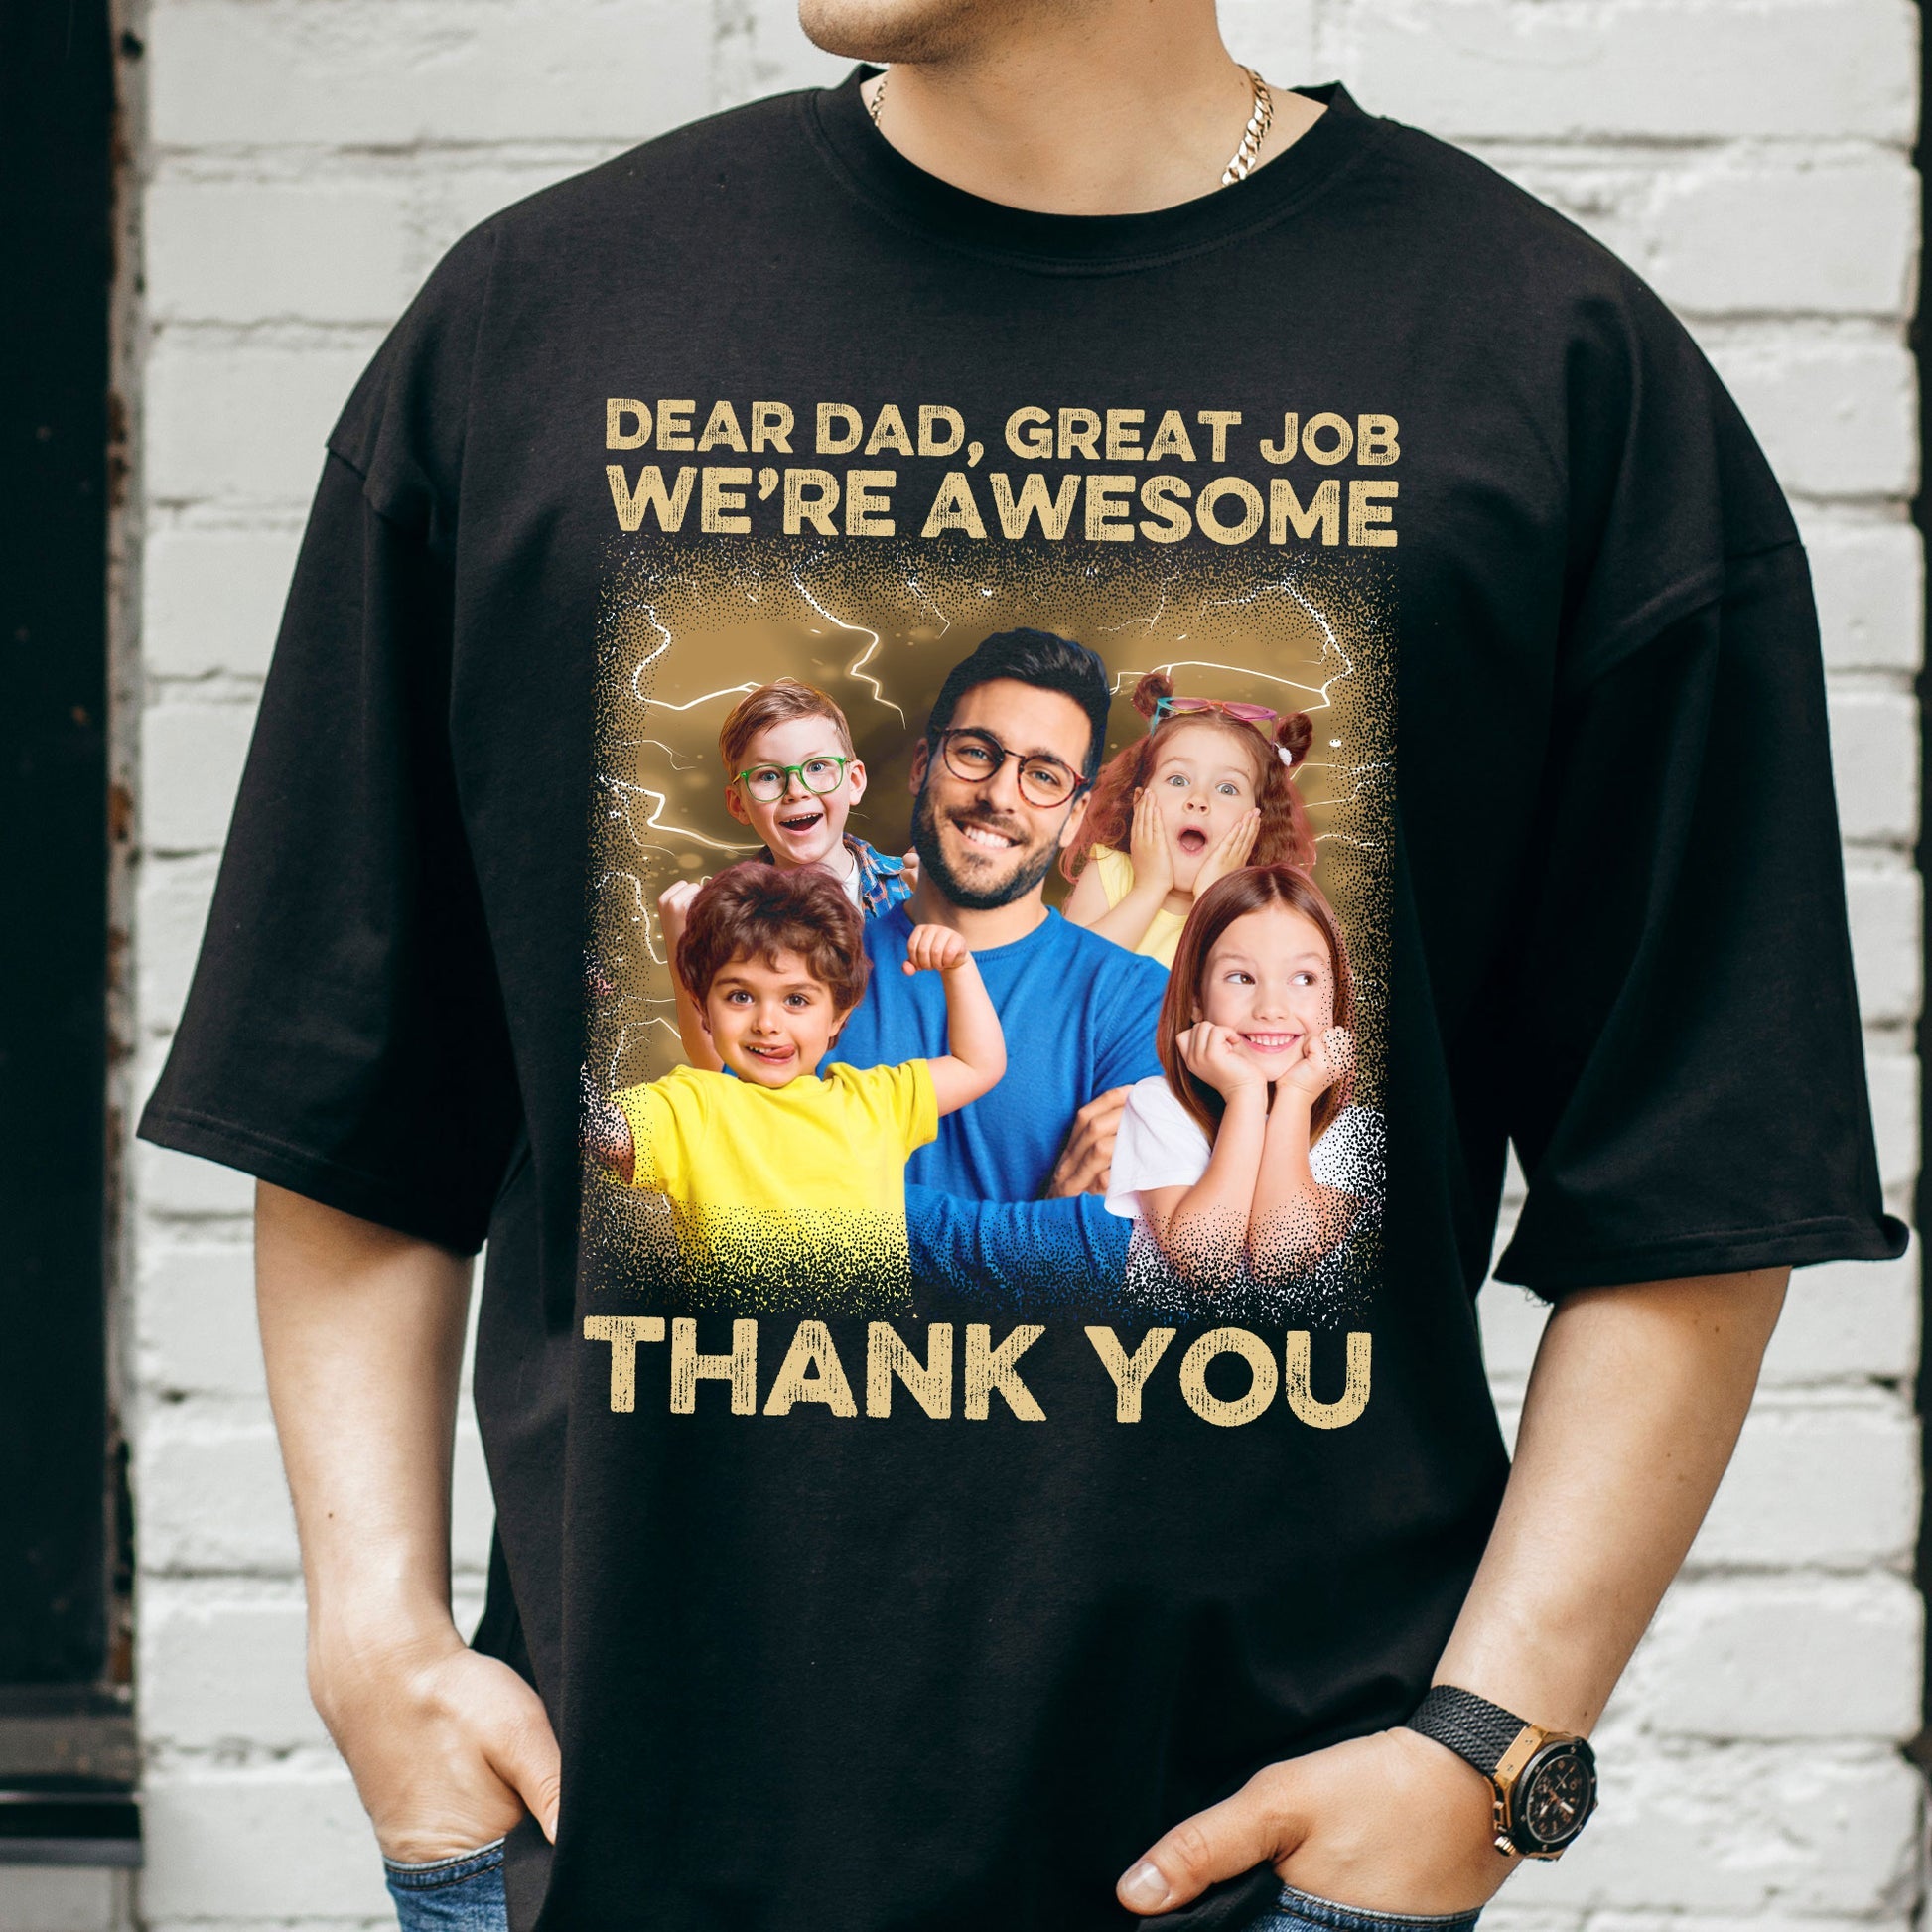 Great Job We're Awesome Vintage Bootleg Tee - Personalized Photo Shirt